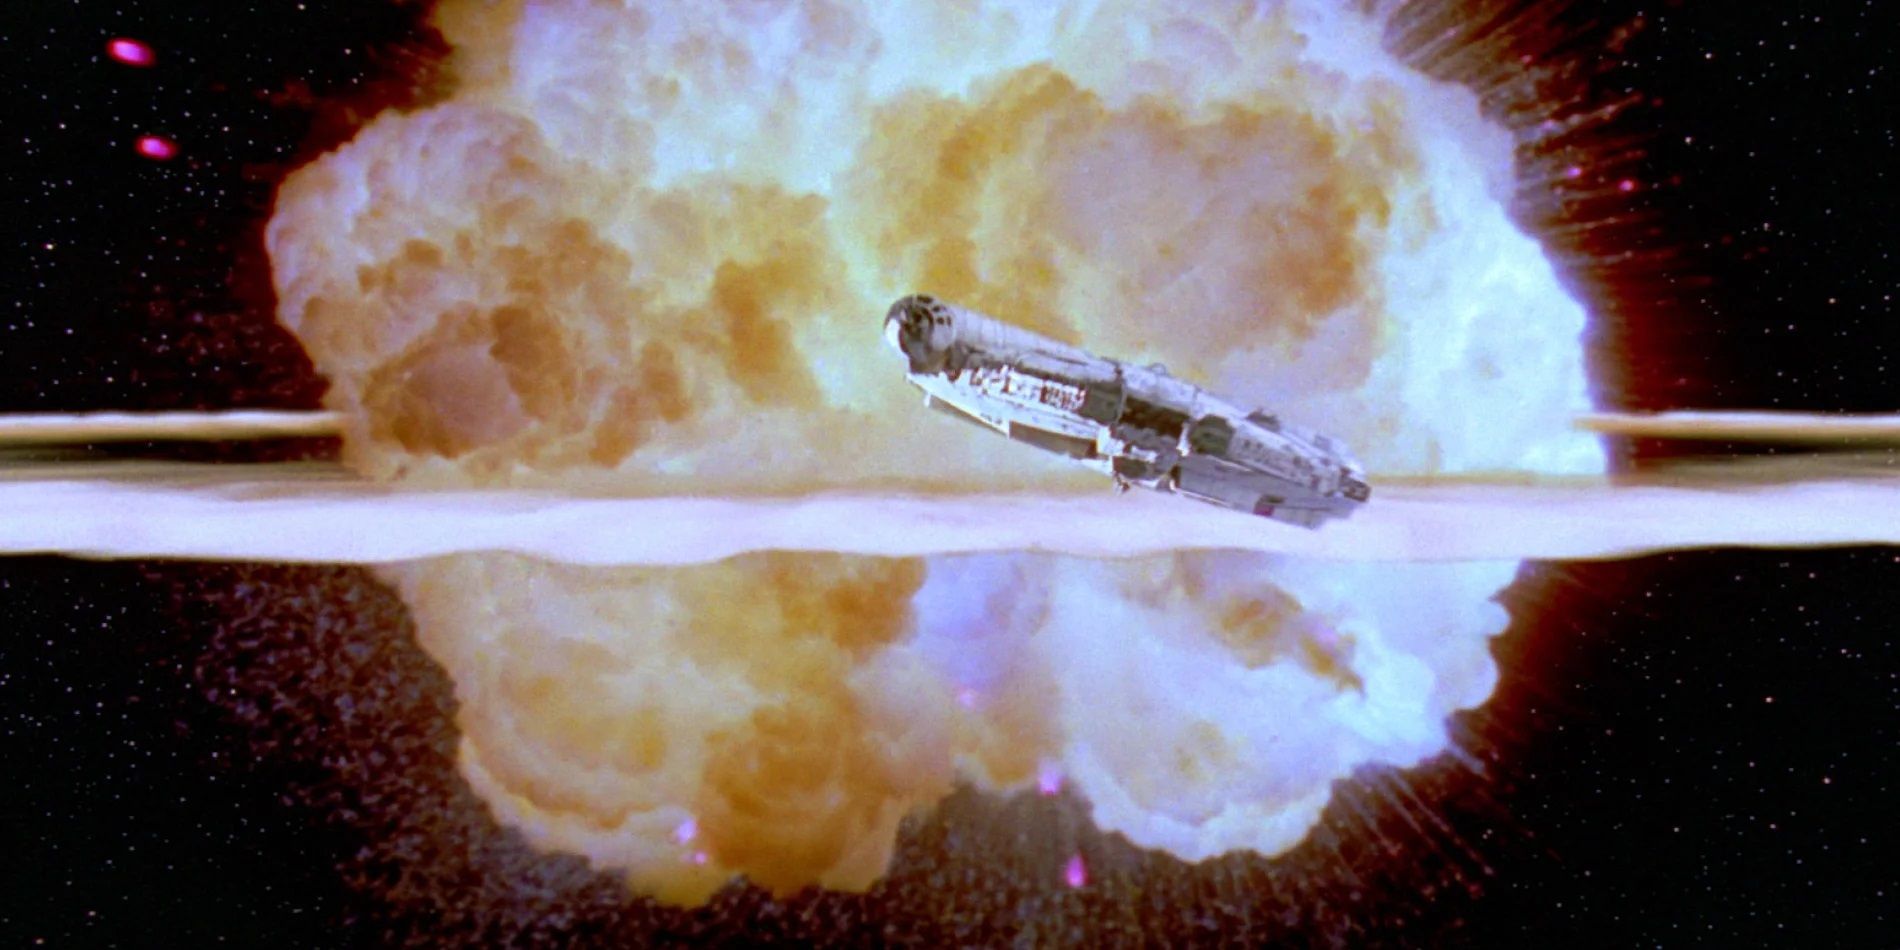 The Death Star explosion in Return of the Jedi